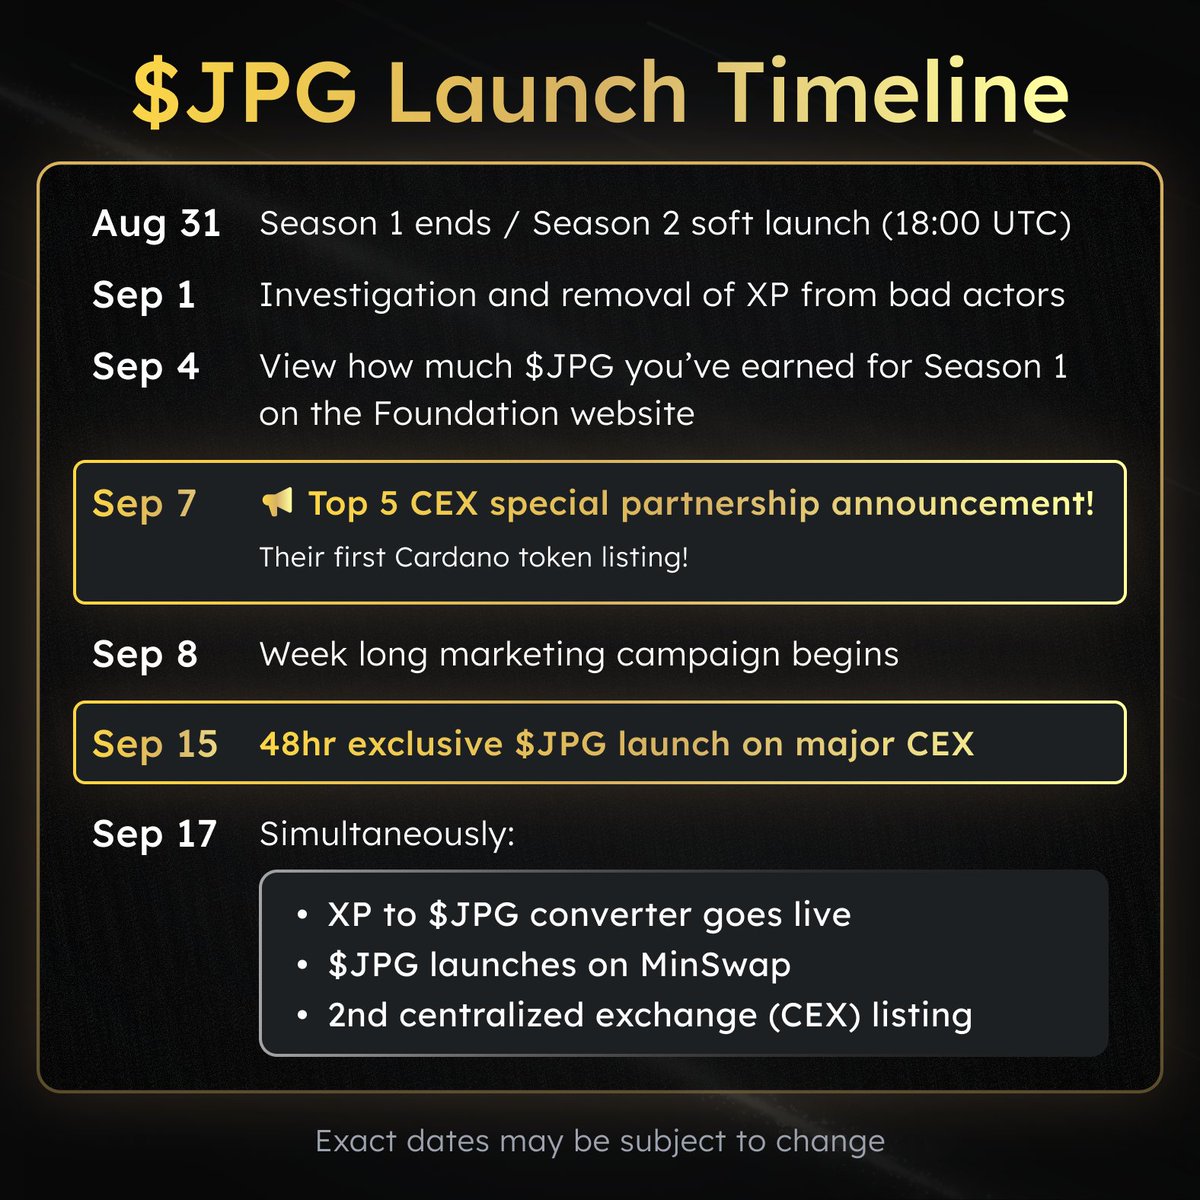 Exciting times for Cardano ahead! 🔥 Introducing the $JPG Token timeline 📅 Stay tuned for more updates coming in the next few days!